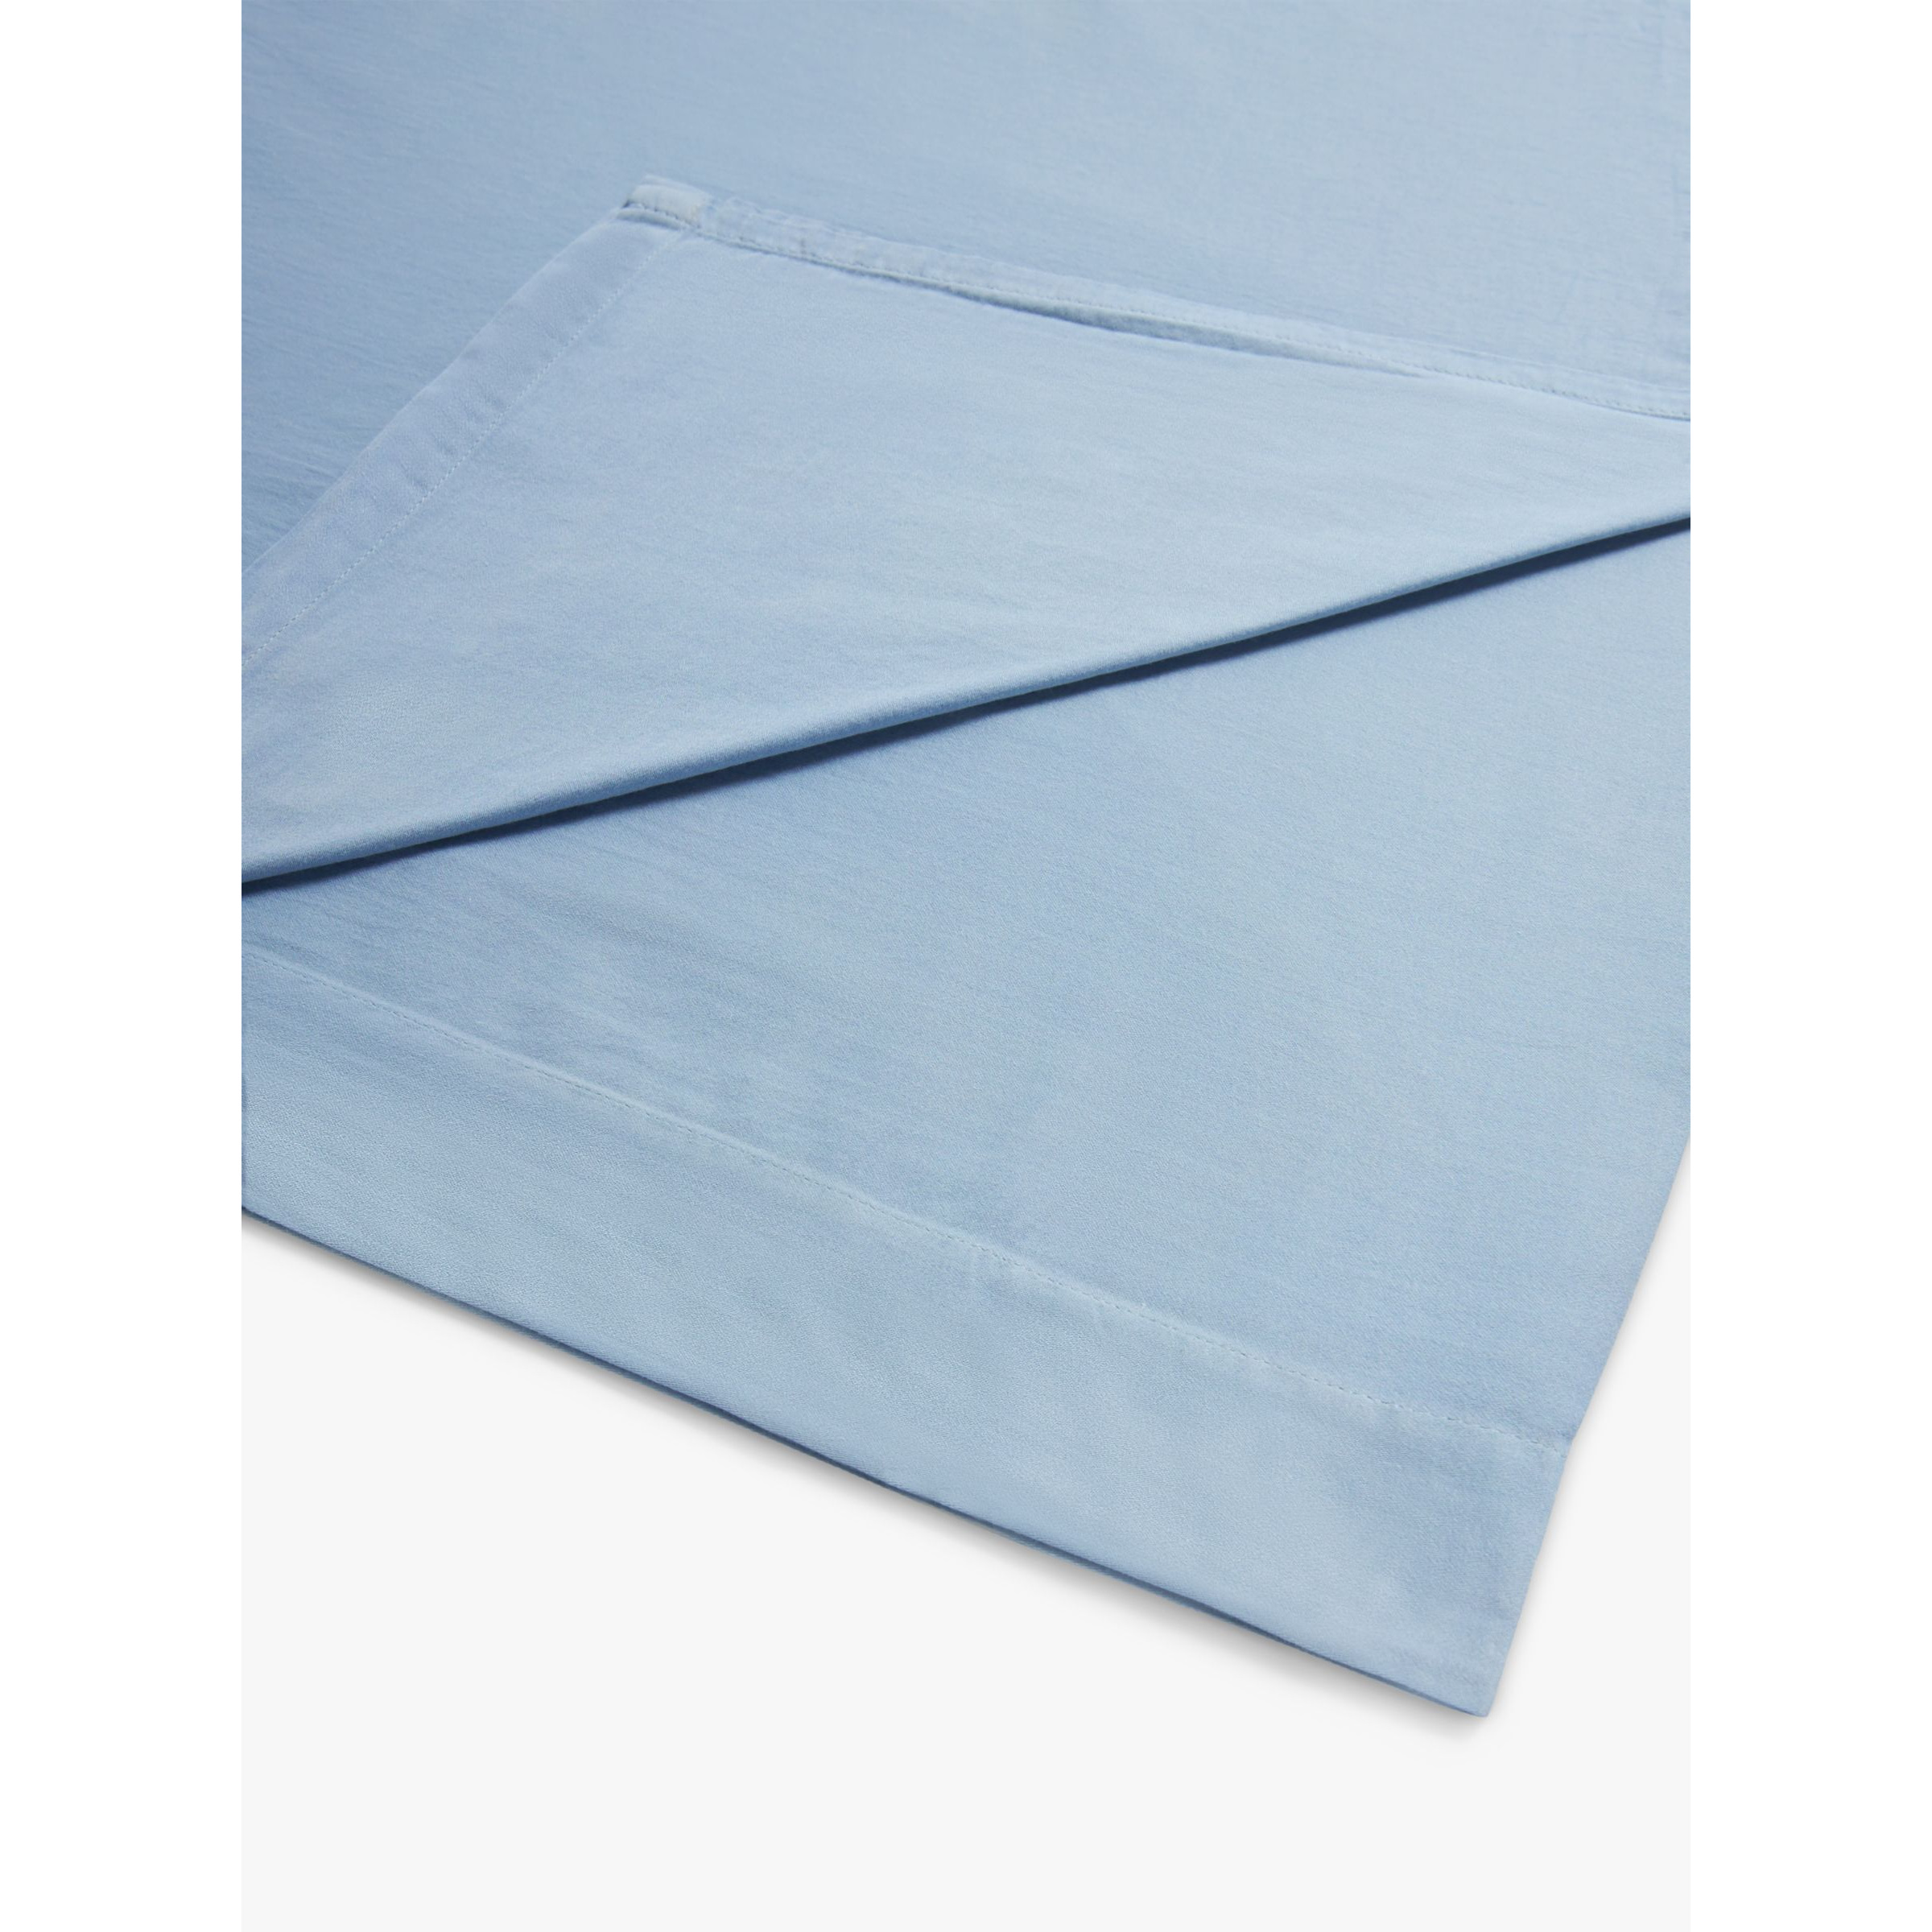 John Lewis Comfy & Relaxed Washed Cotton Flat Sheet - image 1